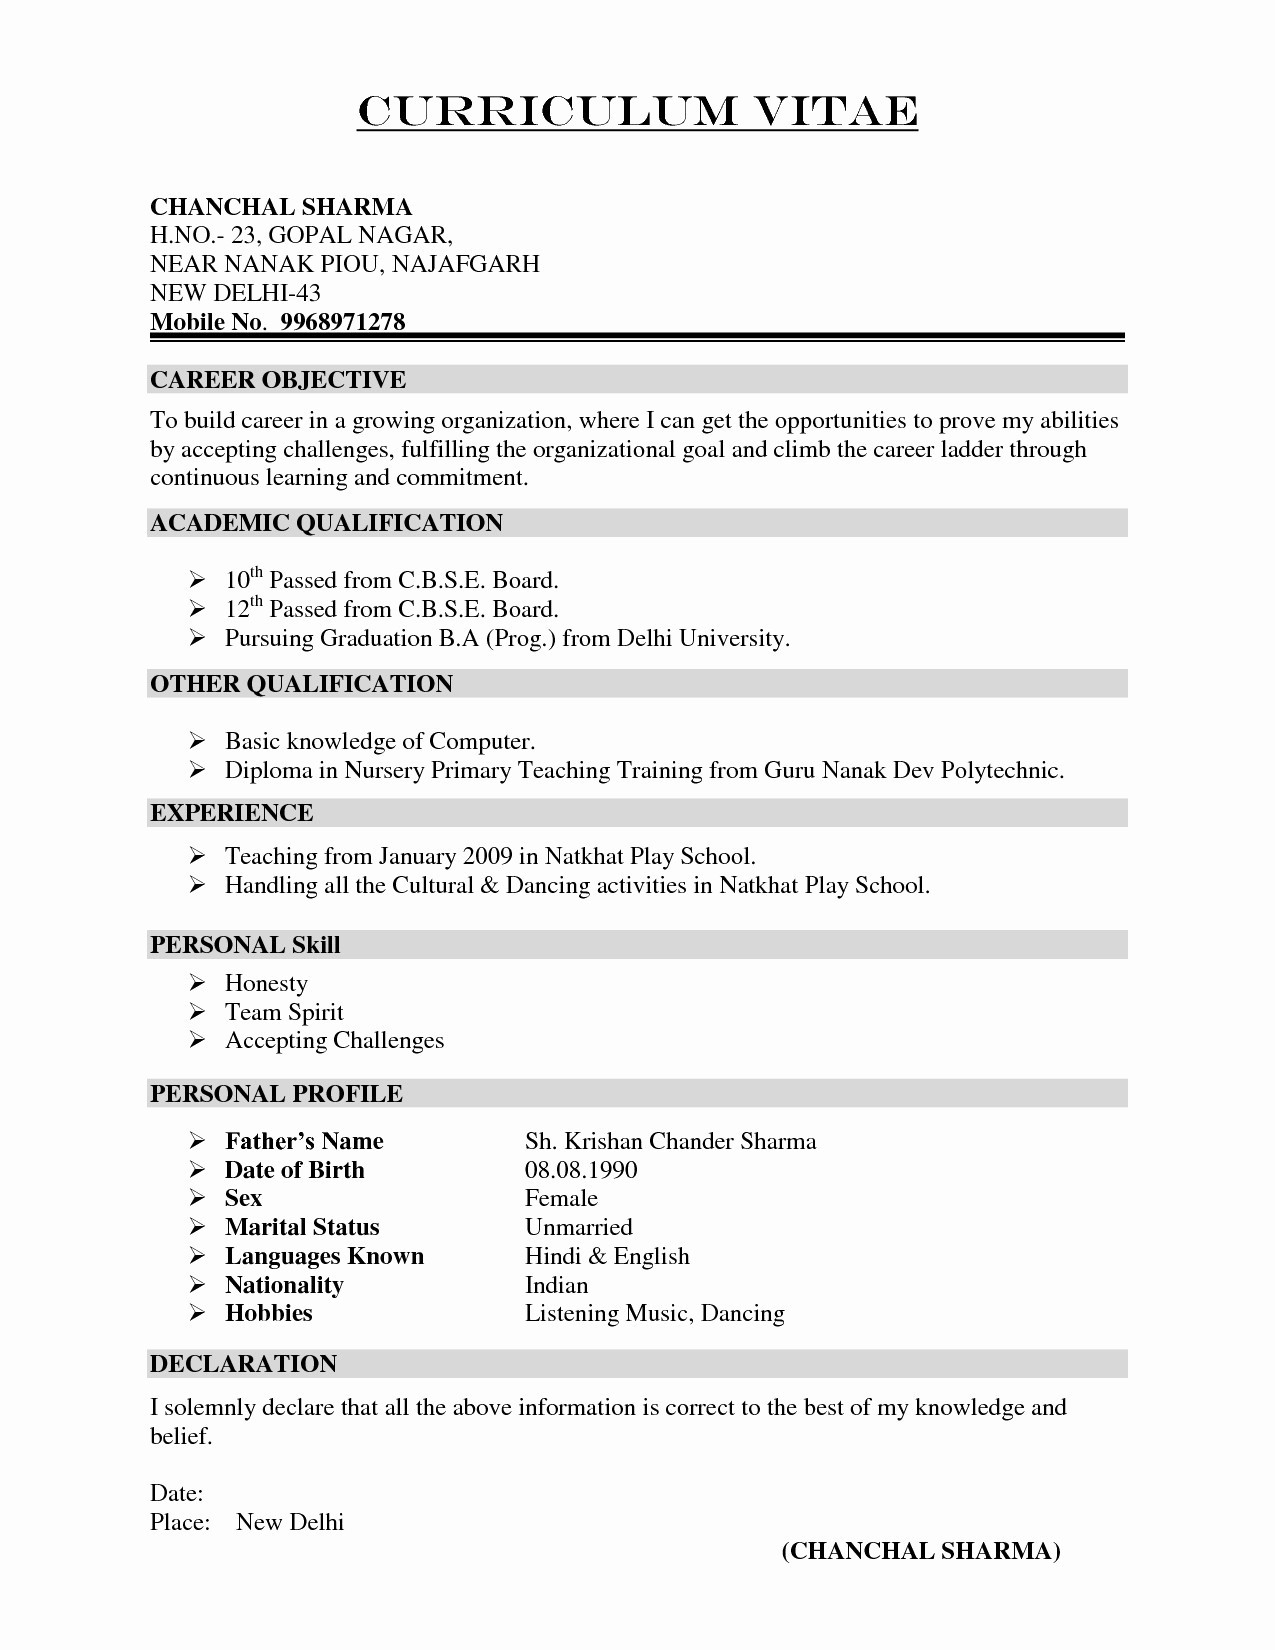 Resume and Cover Letter Template - Resumes and Cover Letters Elegant New Resume Cover Letter formatted